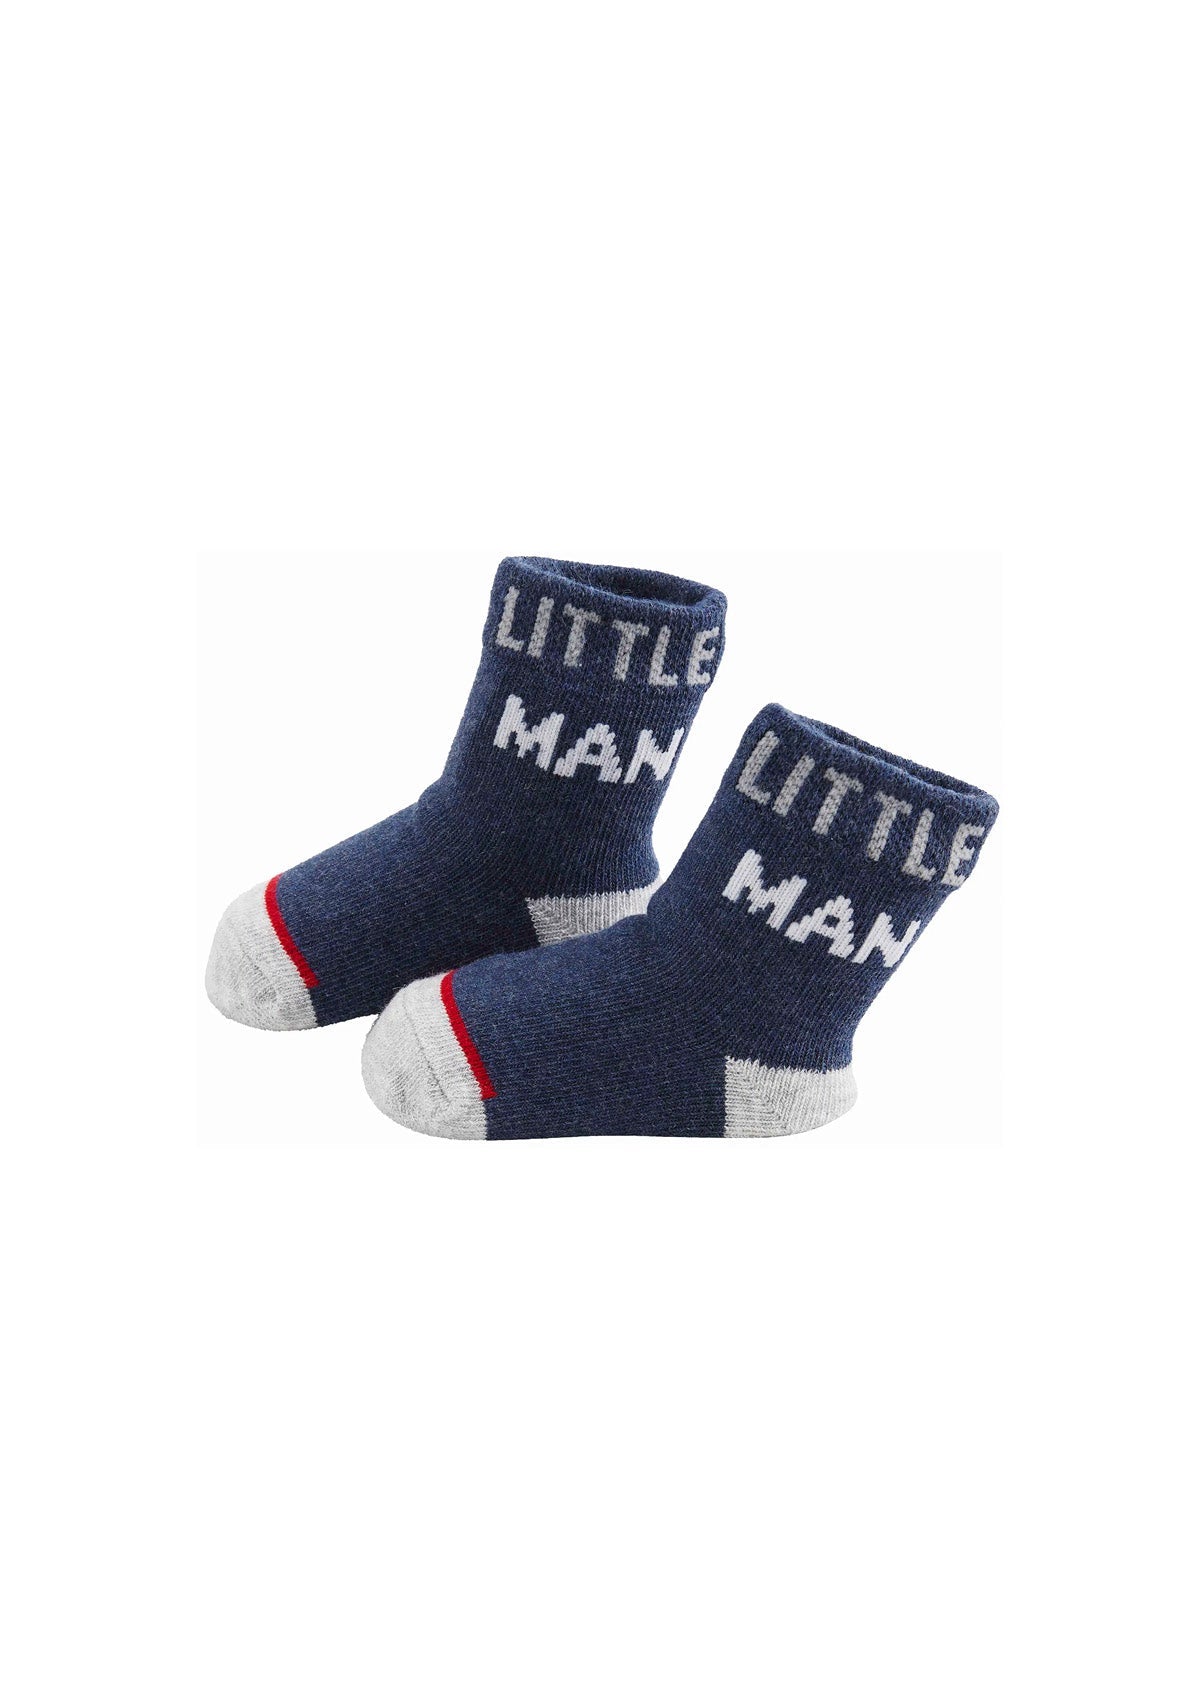 Accessories For the Littles-For the Littles-Socks for the Littles-Ruby Jane.